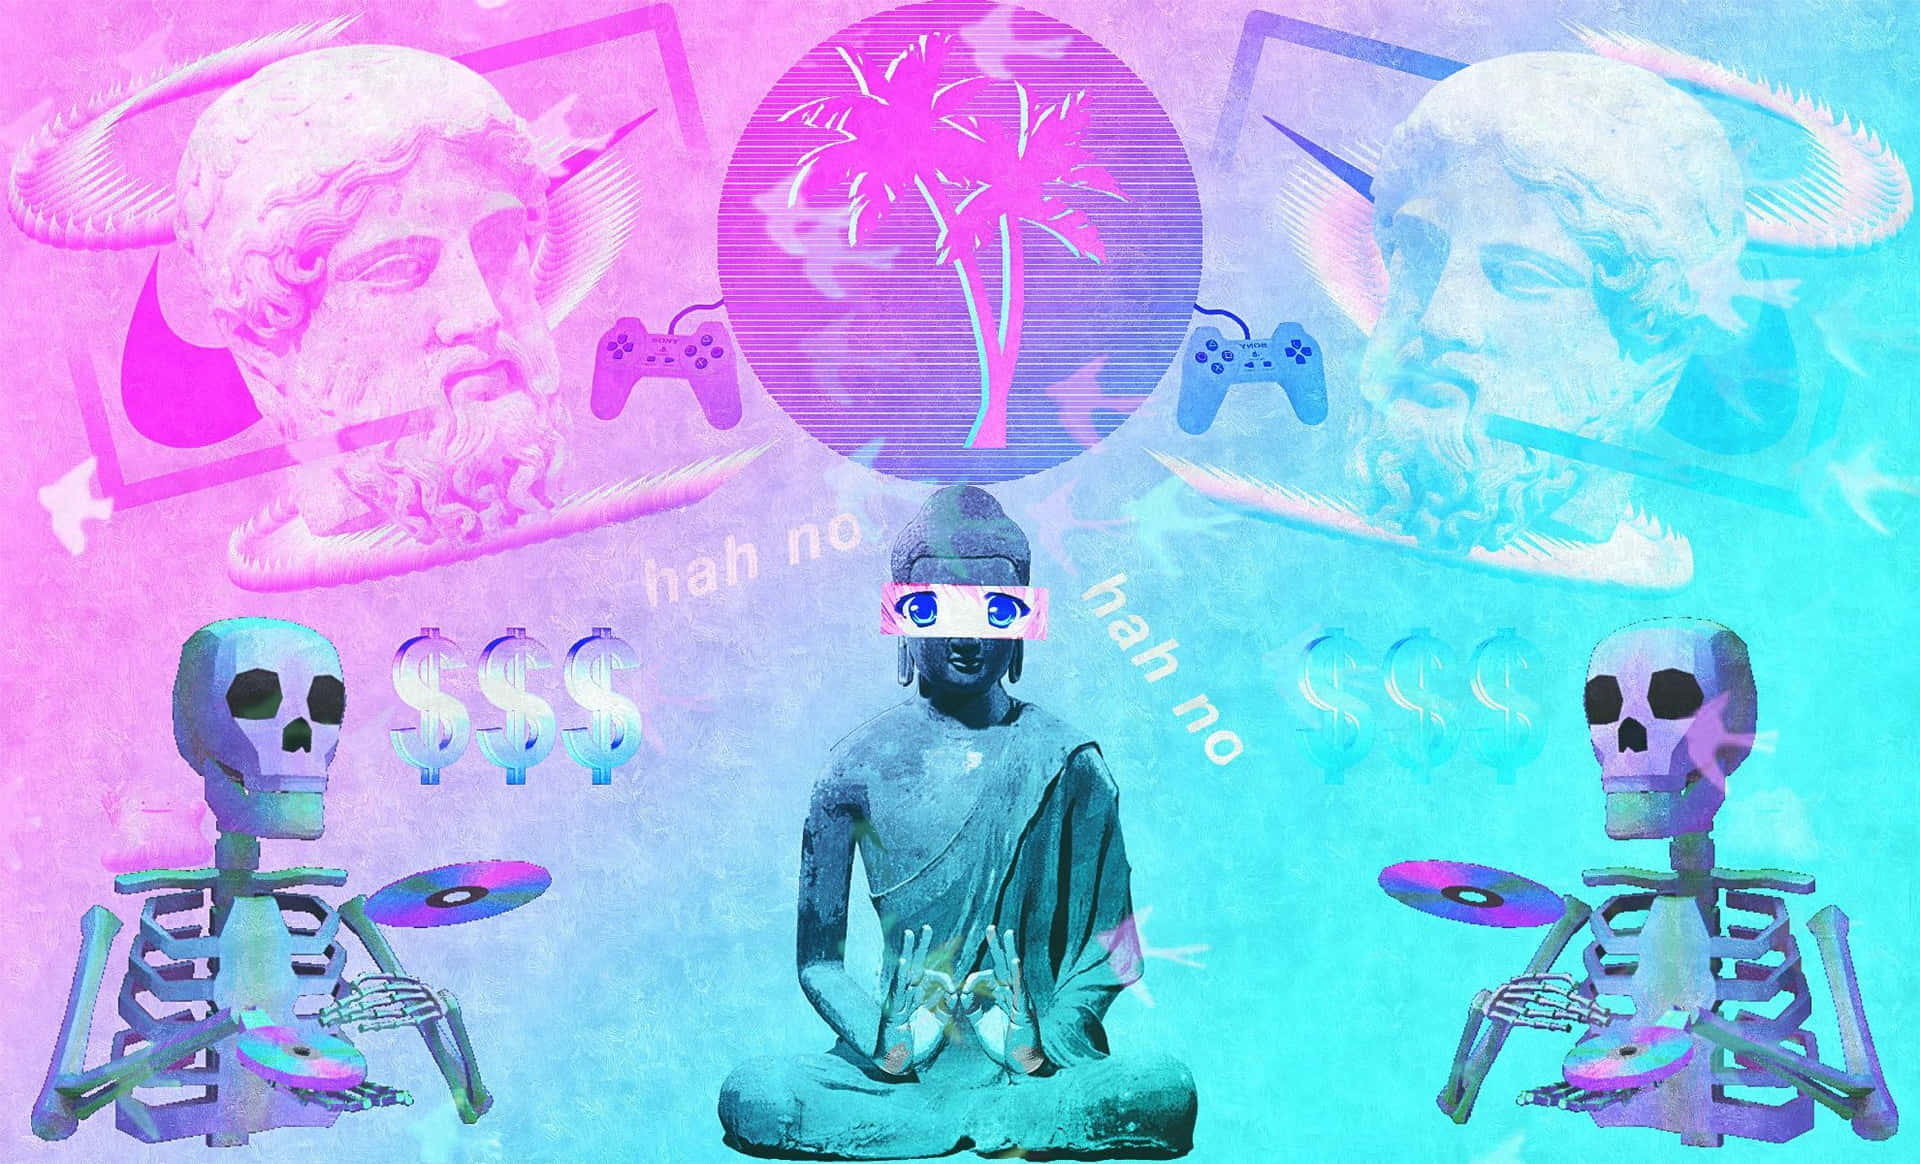 Take Home the Future with Vaporwave Tablet Wallpaper